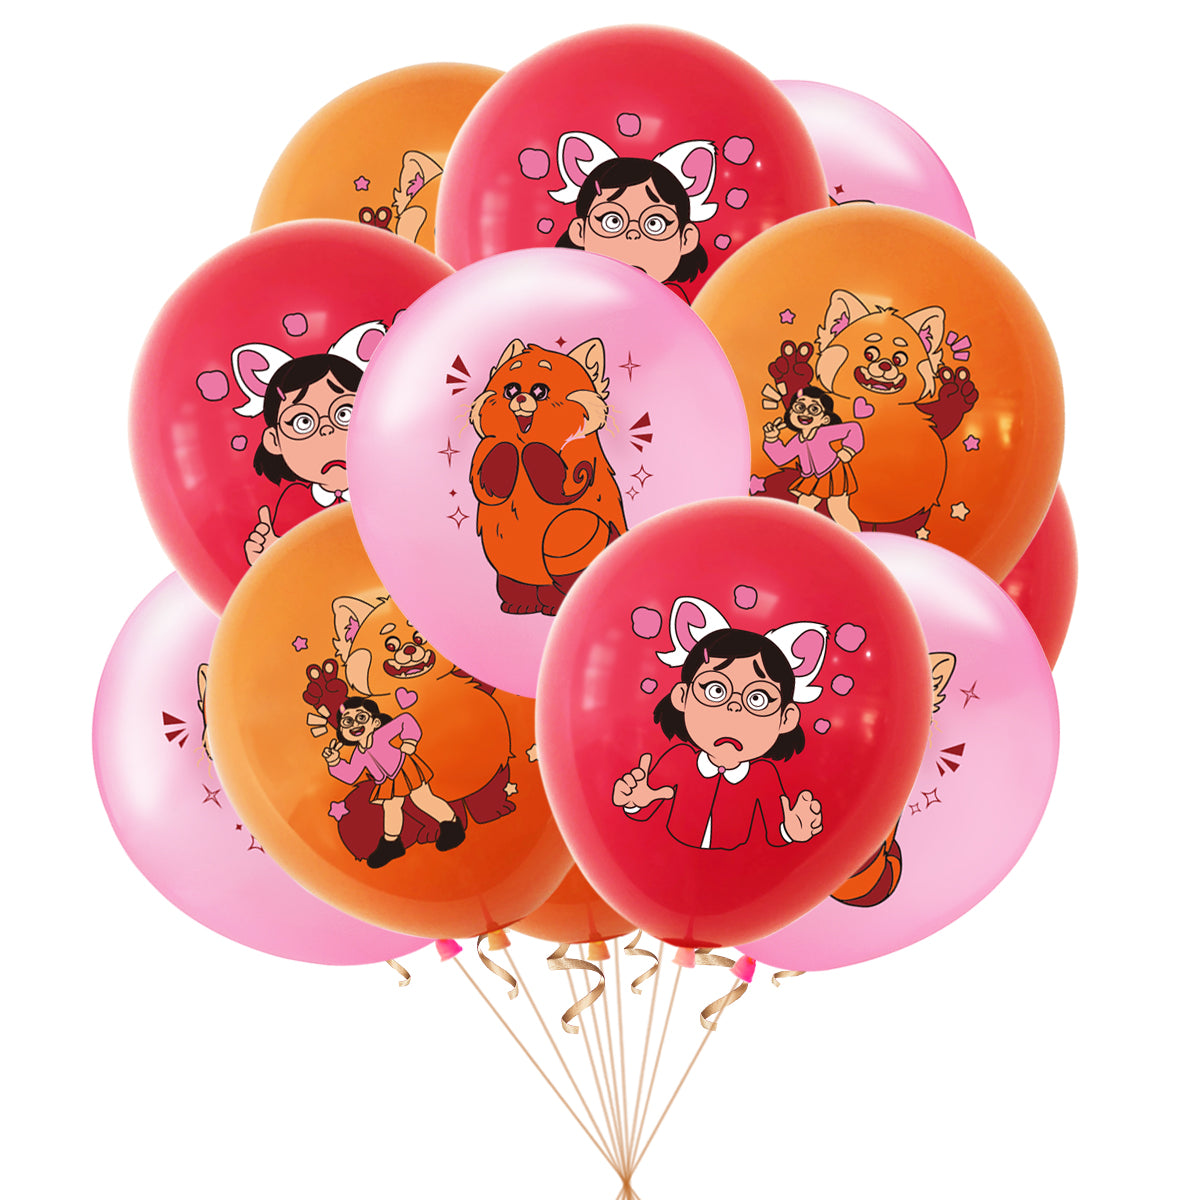 Turnning Red Birthday Party Decorations - Party Corner - BM Trading